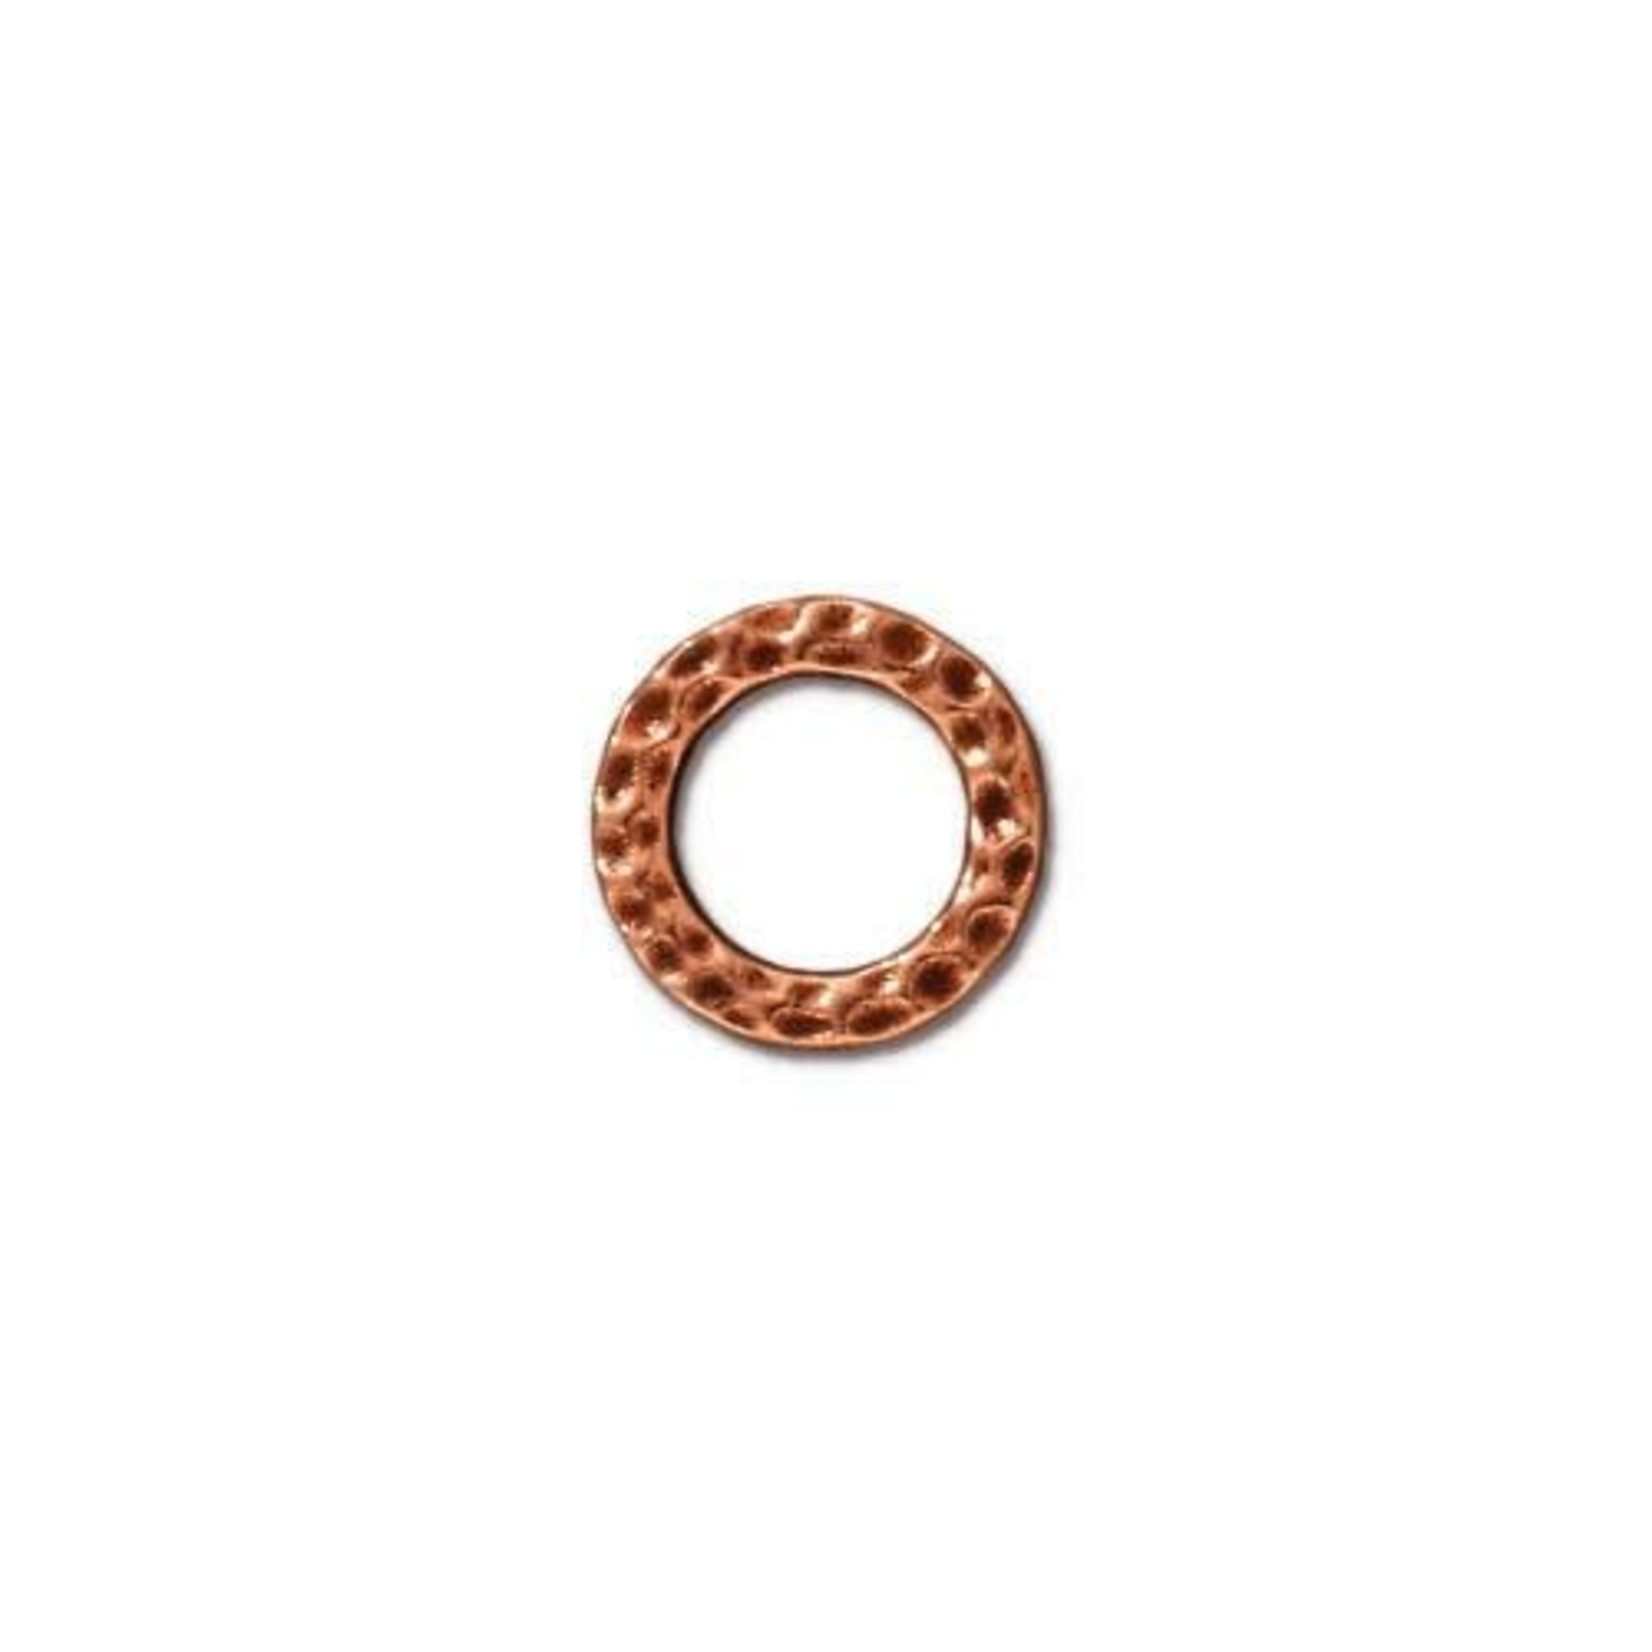 TierraCast Tierracast Antique Copper Plated Hammertone Small Ring